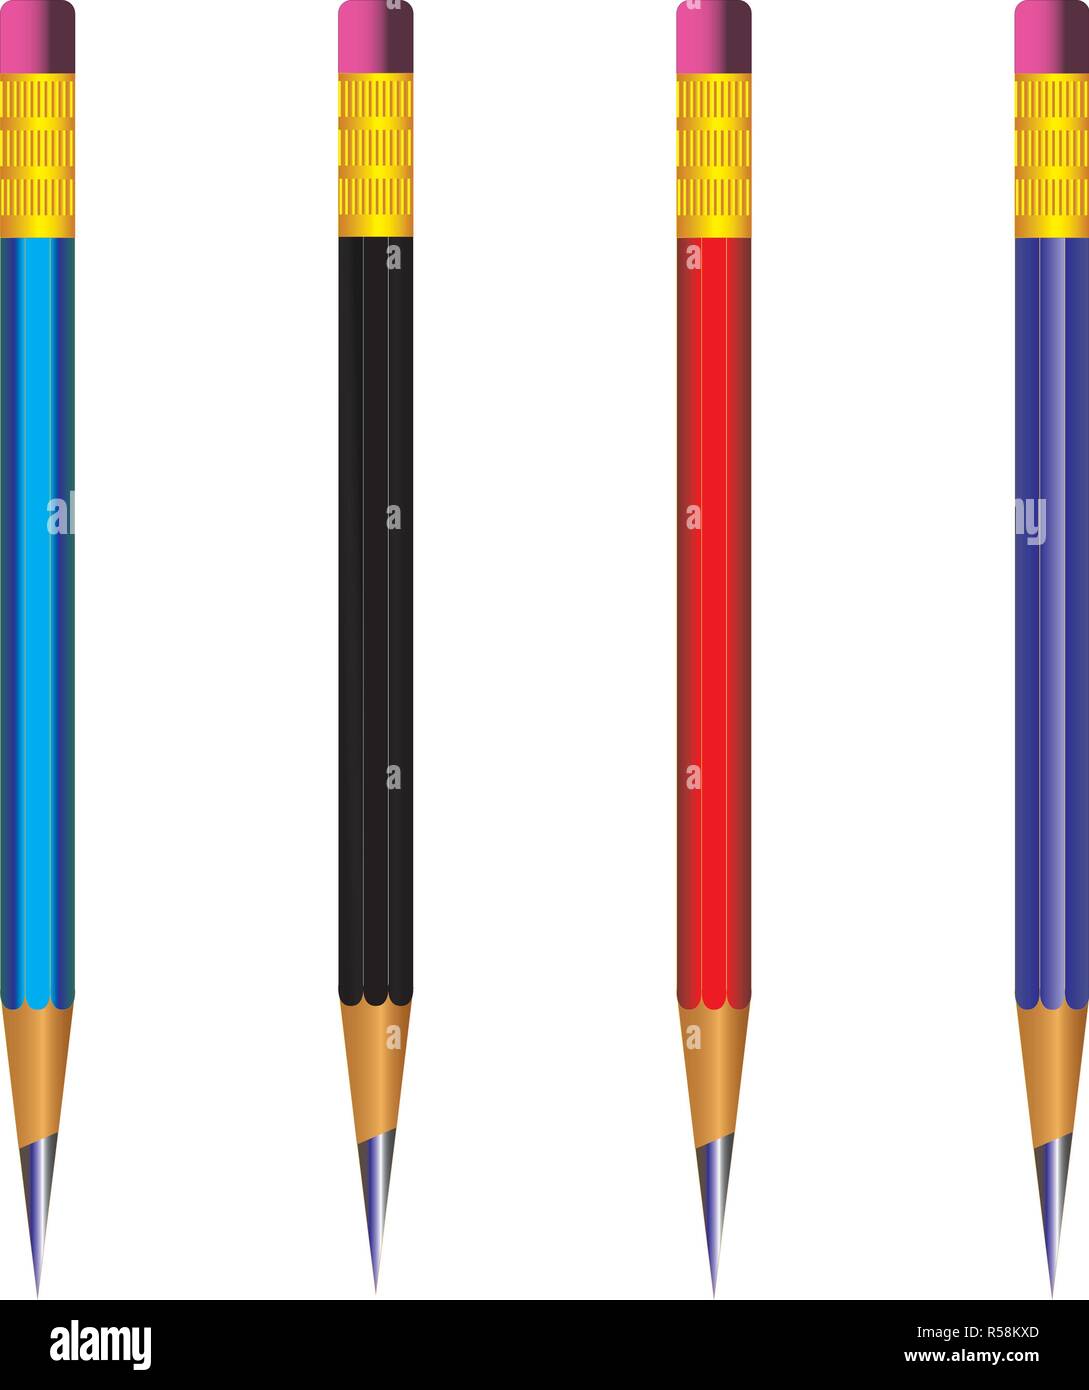 Vector of lead sharp pencil with eraser on white background with realistic 3D wooden four pencils with eraser on white background.Vector illustration Stock Vector